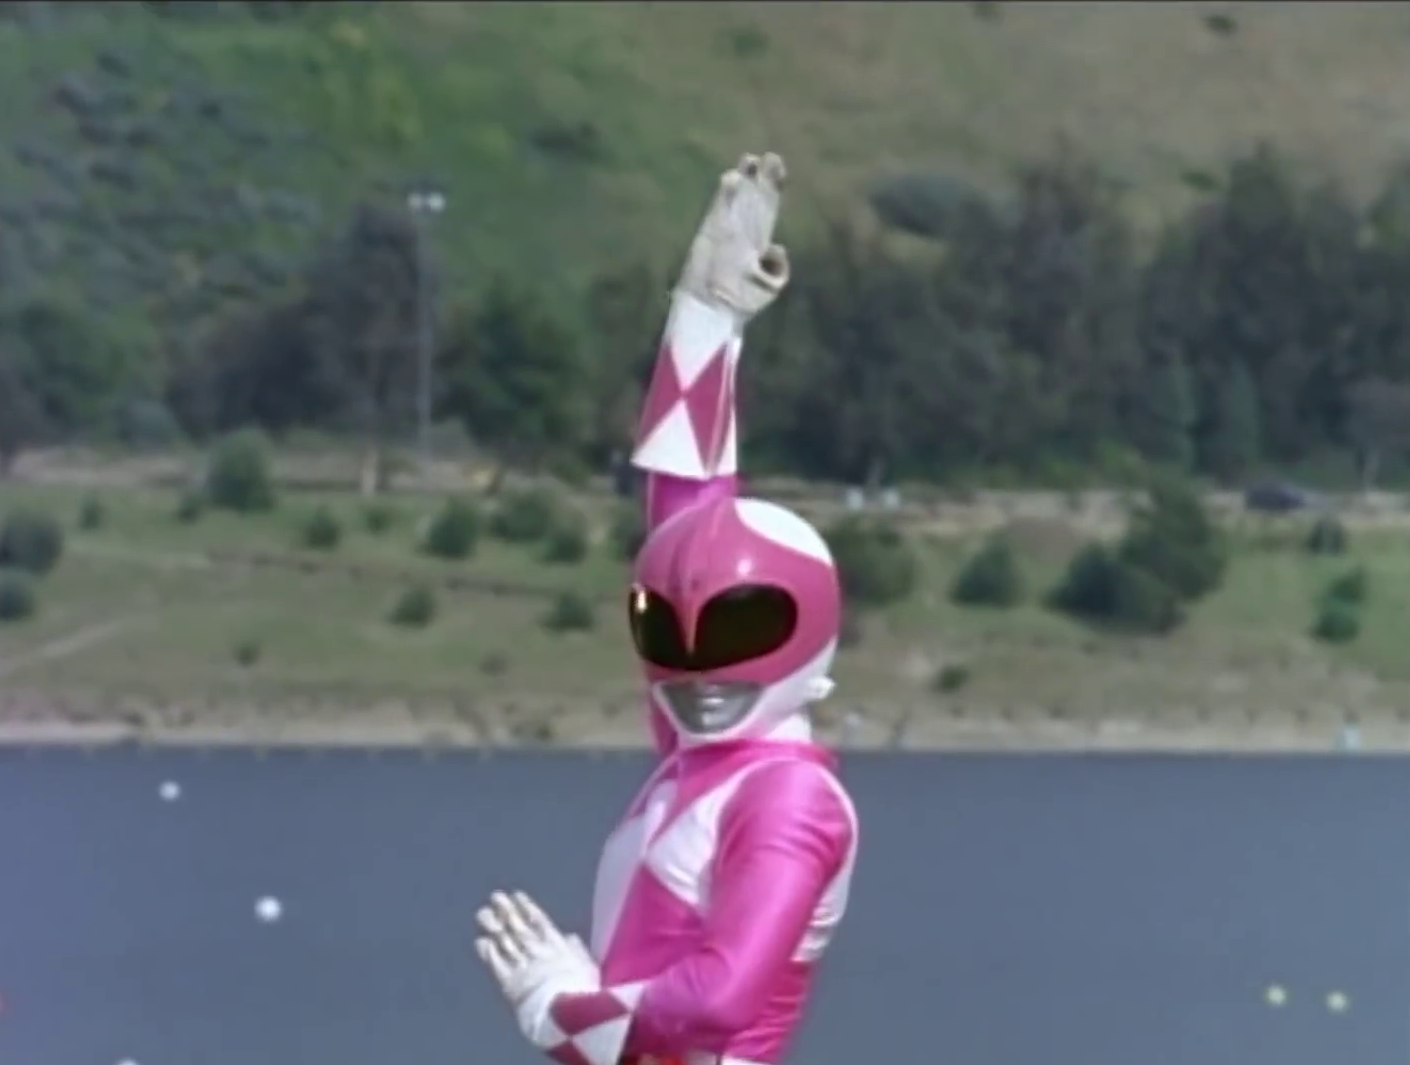 Free Ai Image Generator - High Quality and 100% Unique Images - iPic.Ai — Mighty  morphing pink zyuranger power ranger pteraranger maskman in tight bodyysuit  with helmet combat pose photorealistic skirt athletic body